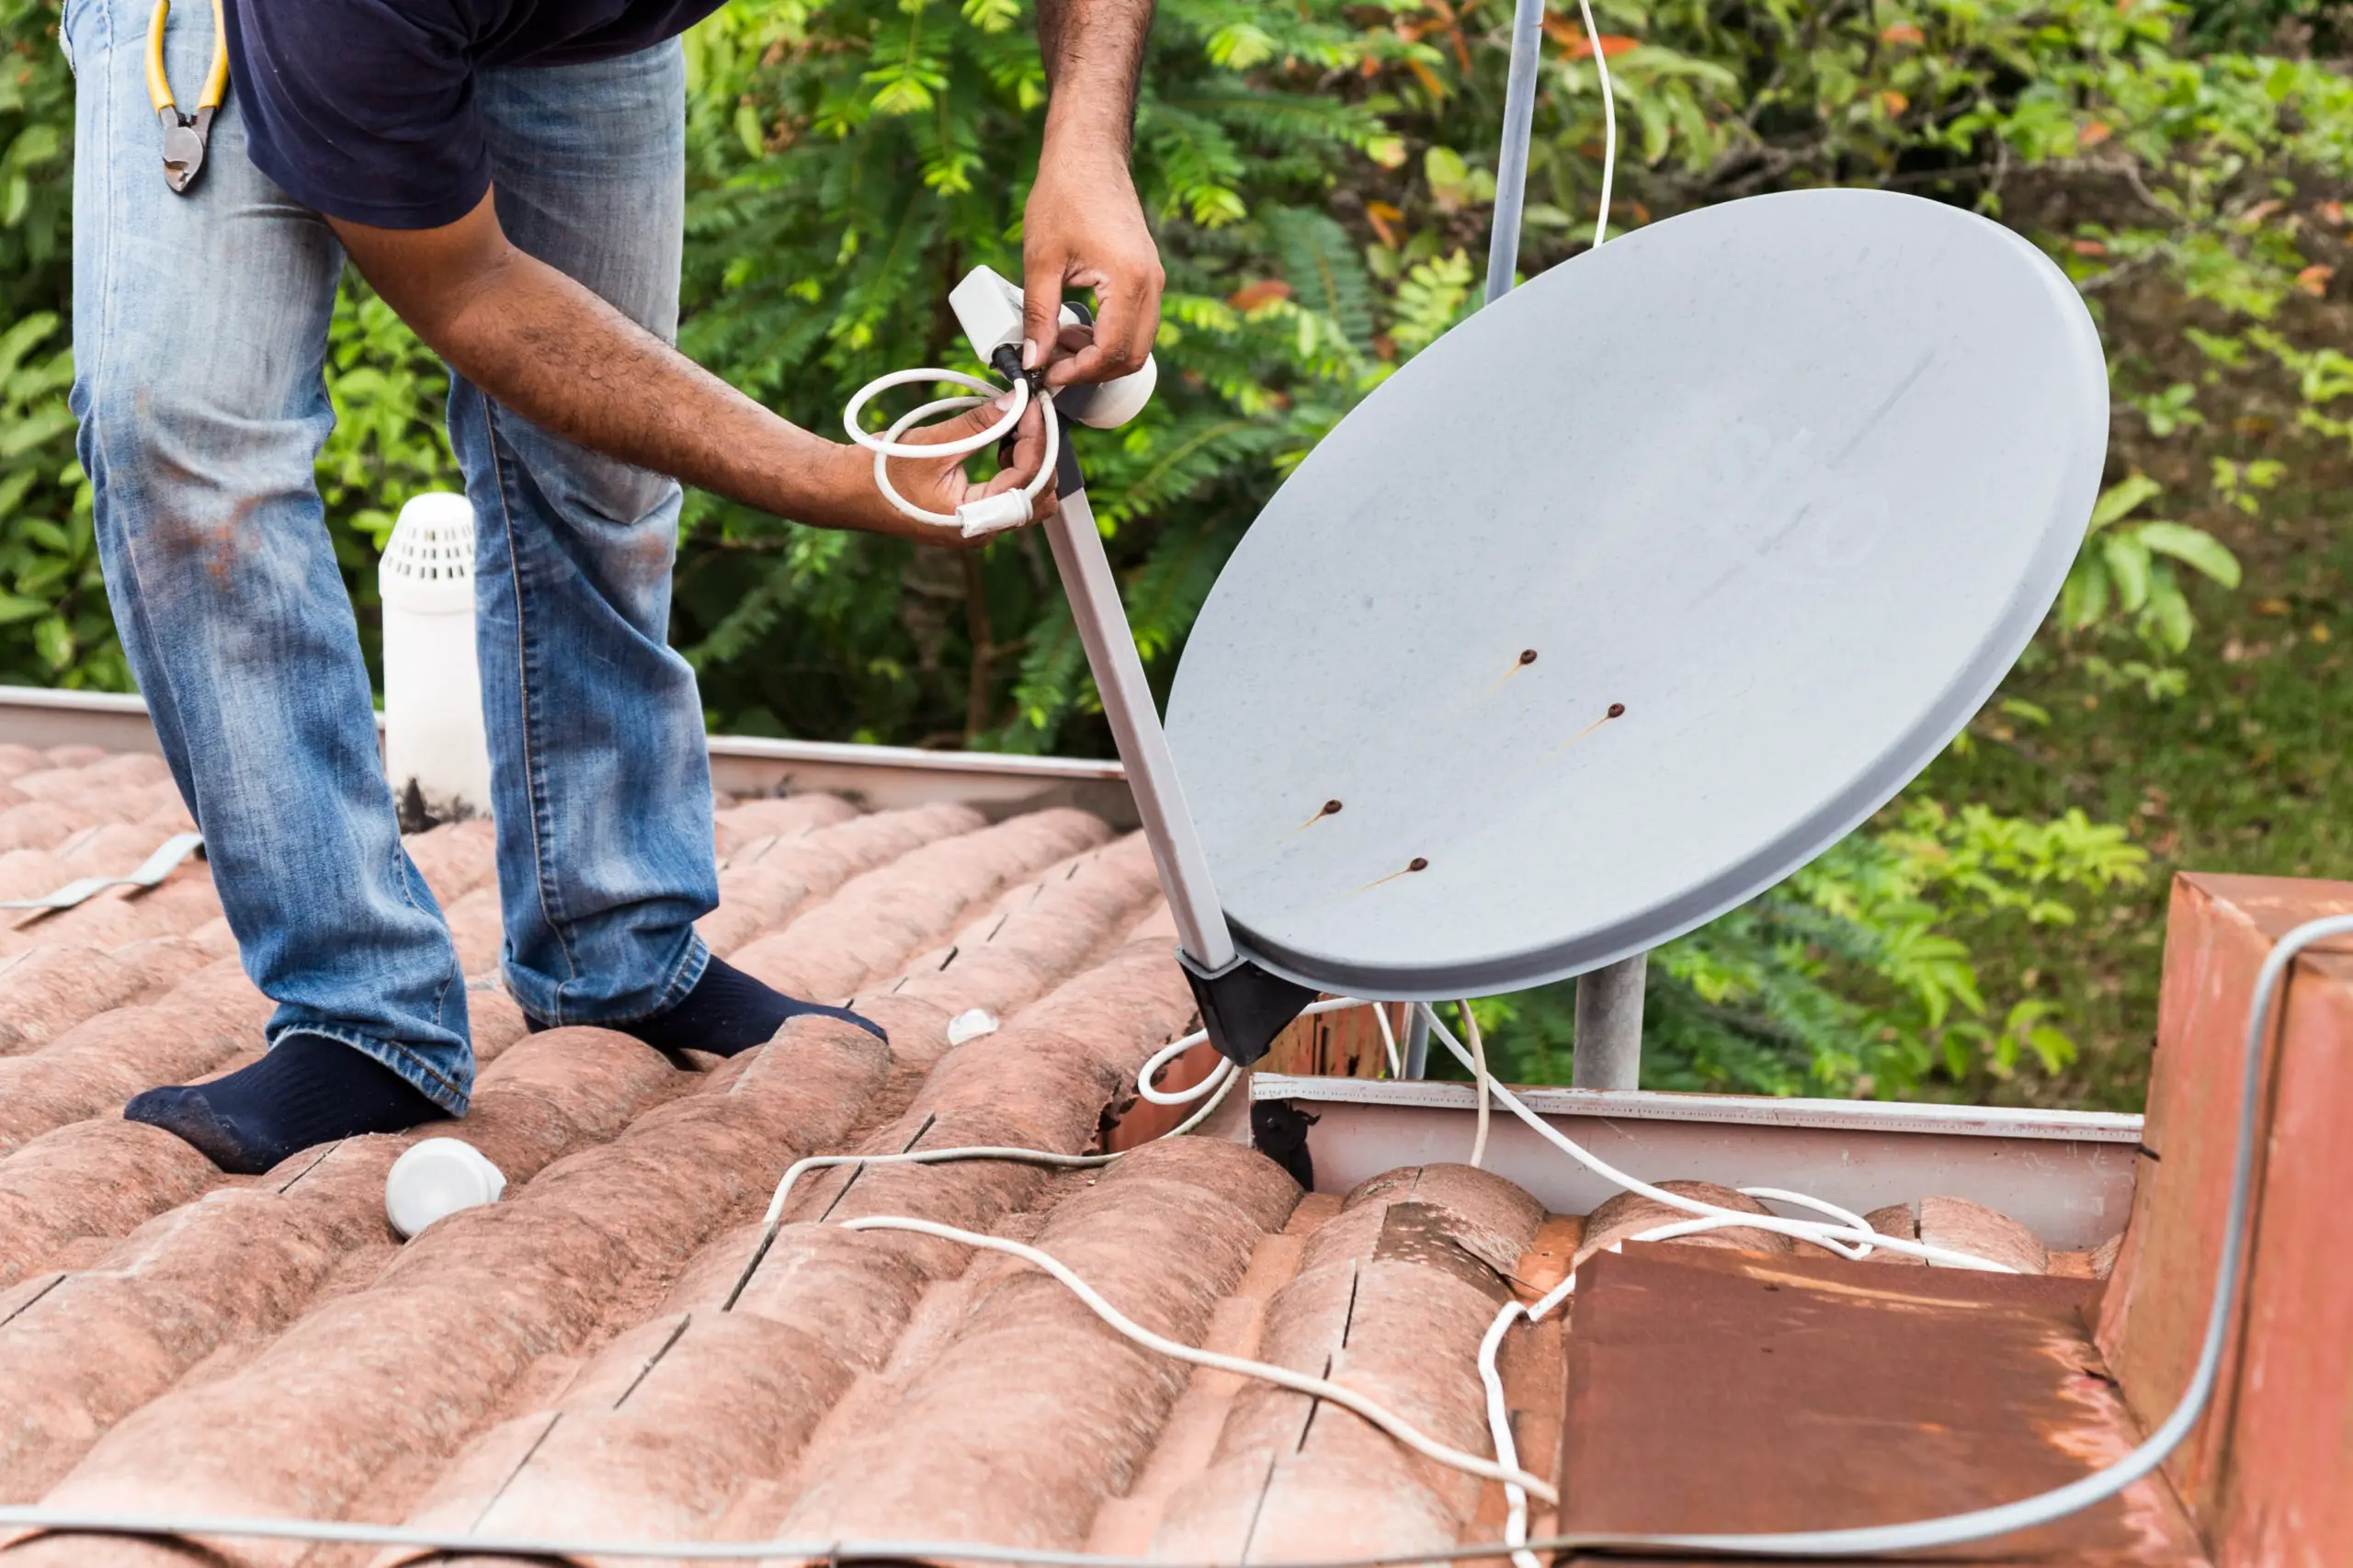 Worker installing satellite dish and antenna on roof top - https://elements.envato.com/worker-installing-satellite-dish-and-antenna - https://elements.envato.com/worker-installing-satellite-dish-and-antenna-on-ro-P64UPCM